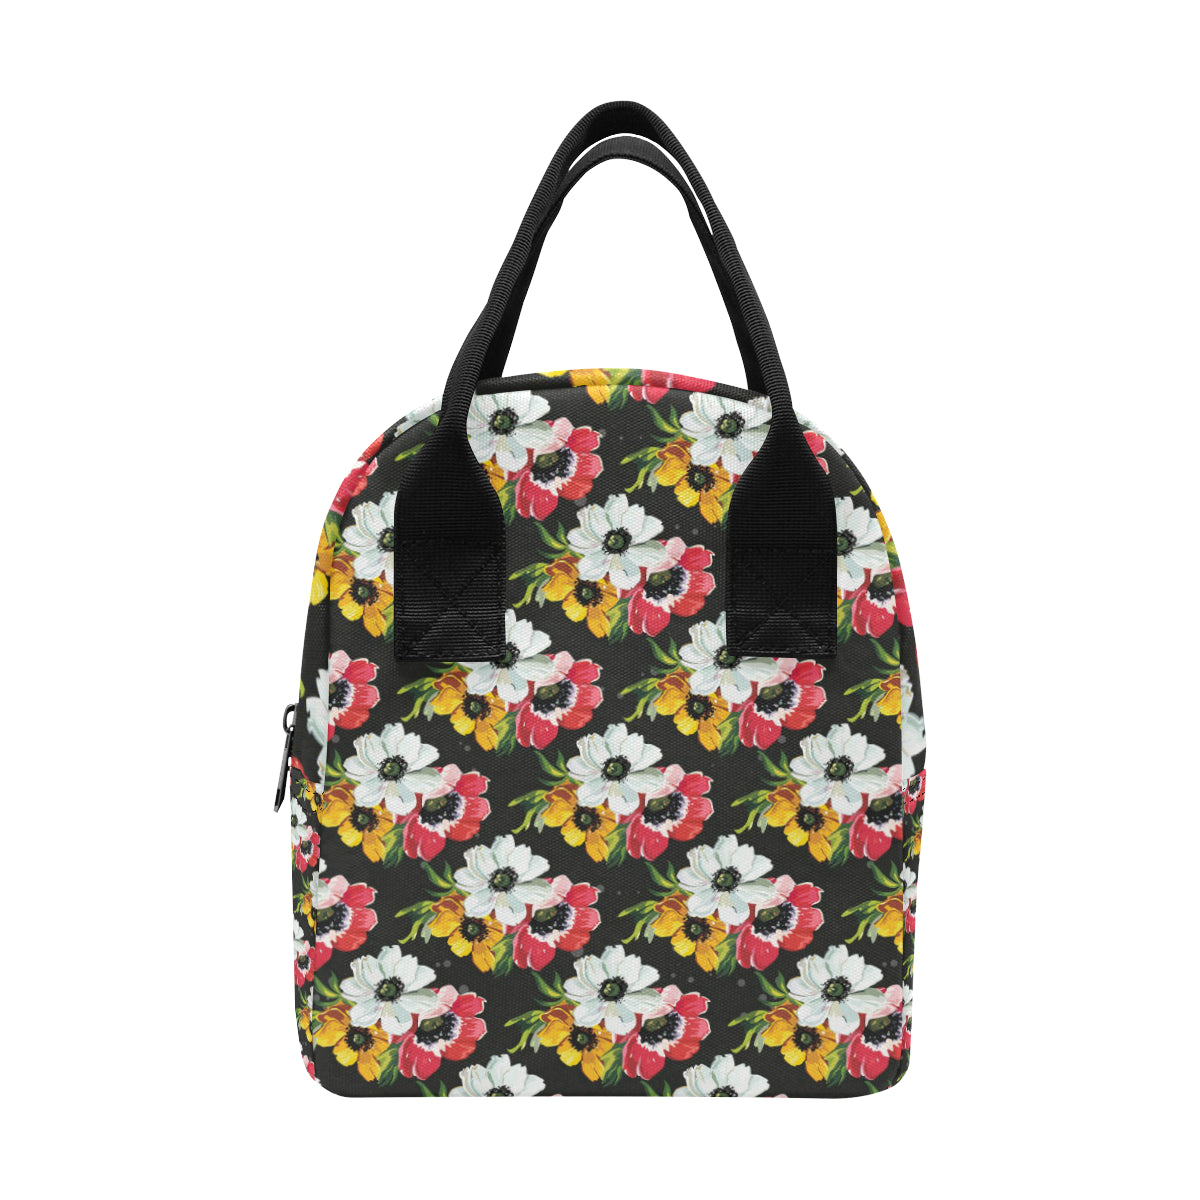 Anemone Pattern Print Design AM07 Insulated Lunch Bag